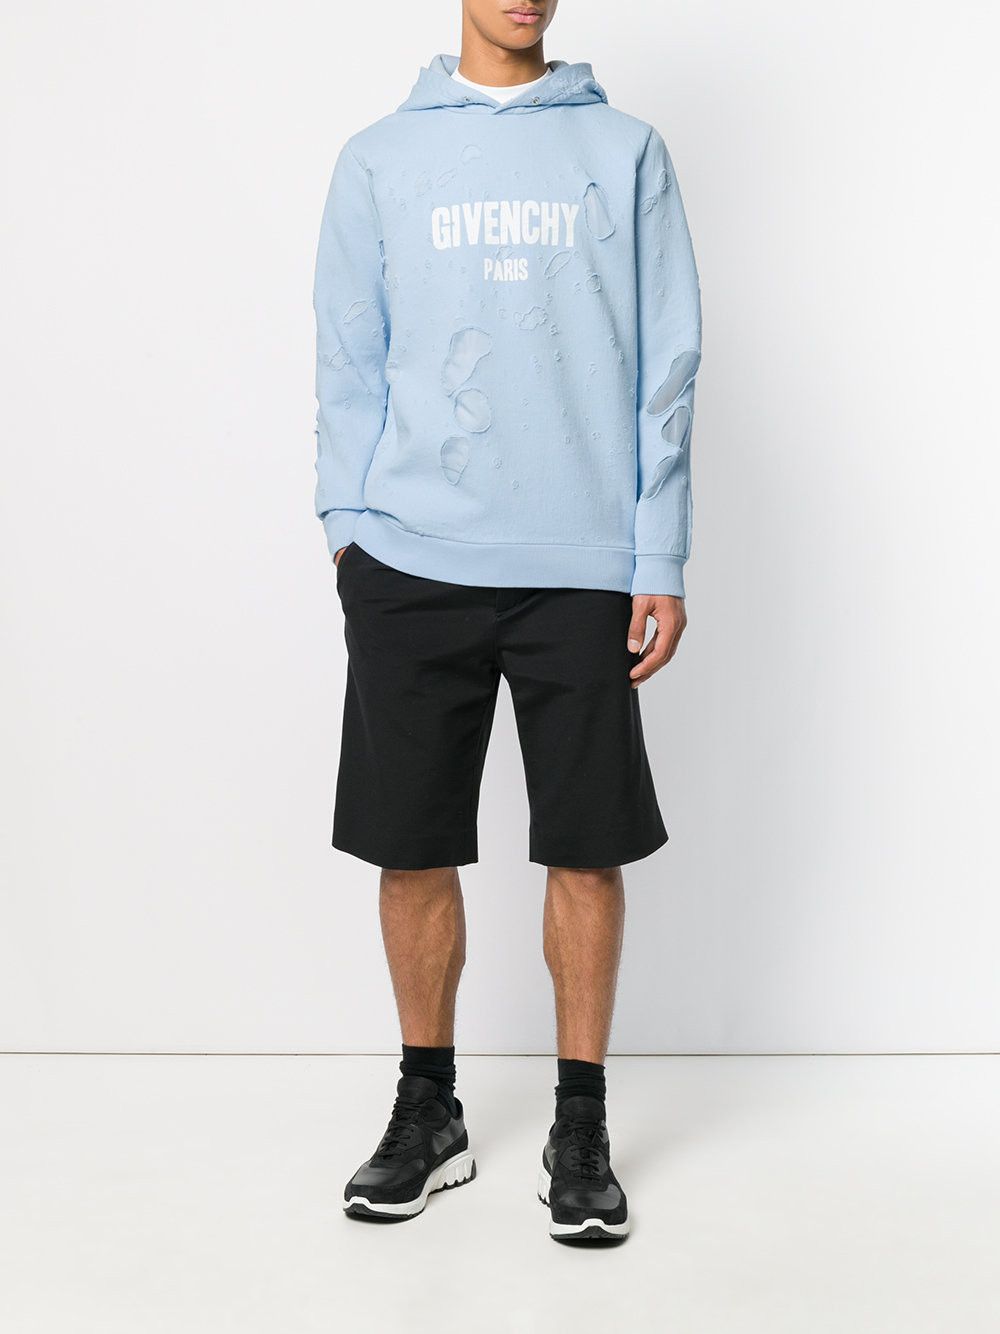 Givenchy $1500 Givenchy Baby Blue Destroyed Distressed Logo Rottweiler Shark Hoodie size M Size US M / EU 48-50 / 2 - 5 Thumbnail